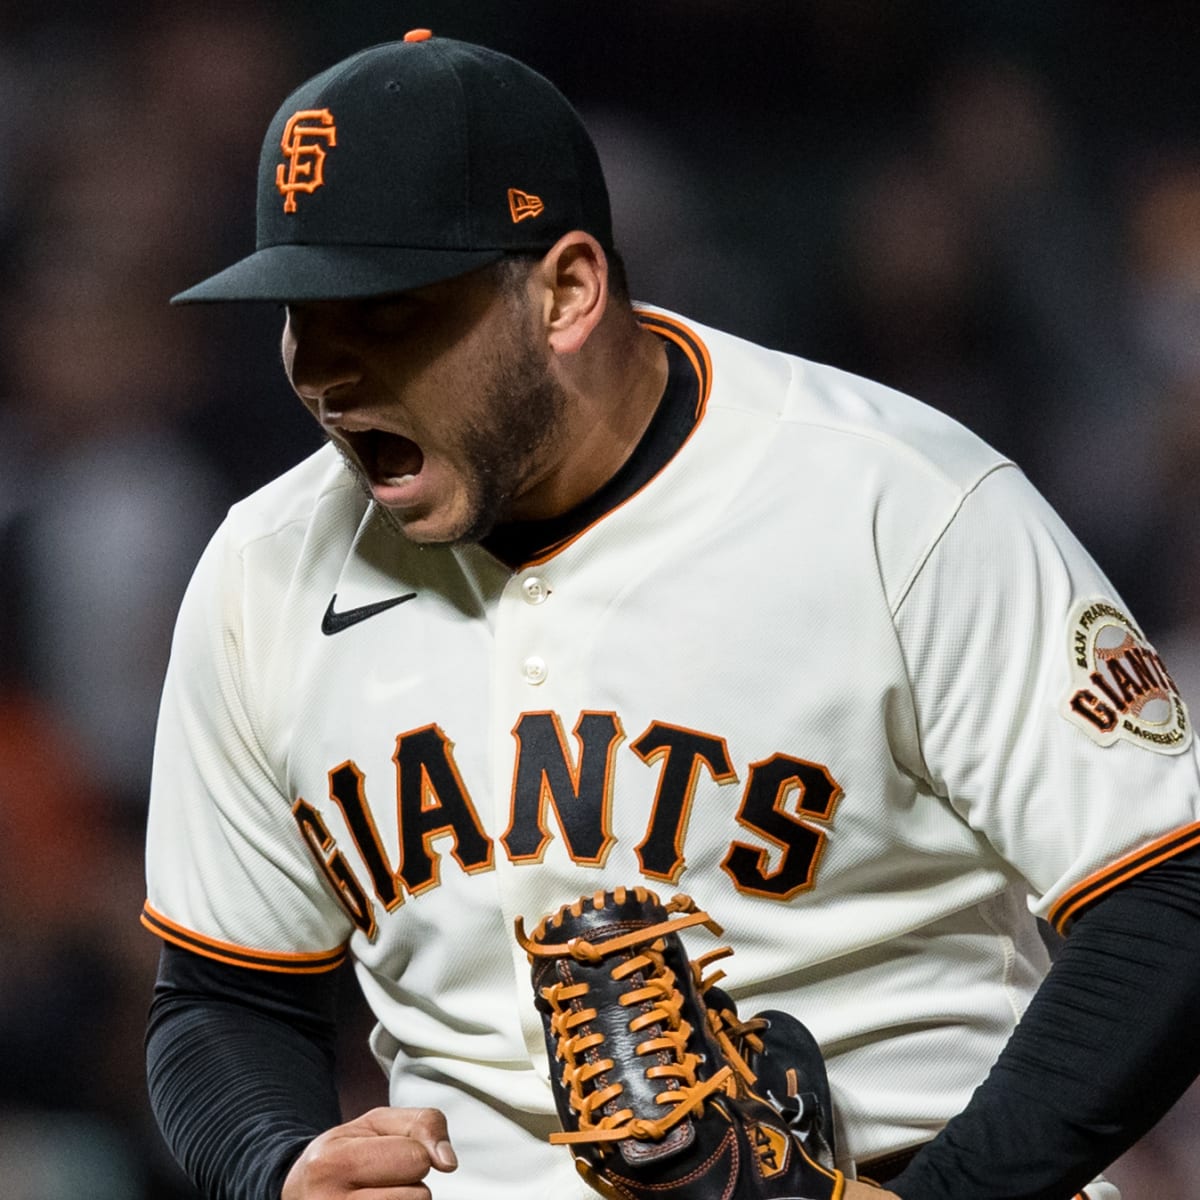 Giants become first team to clinch spot in 2021 MLB postseason